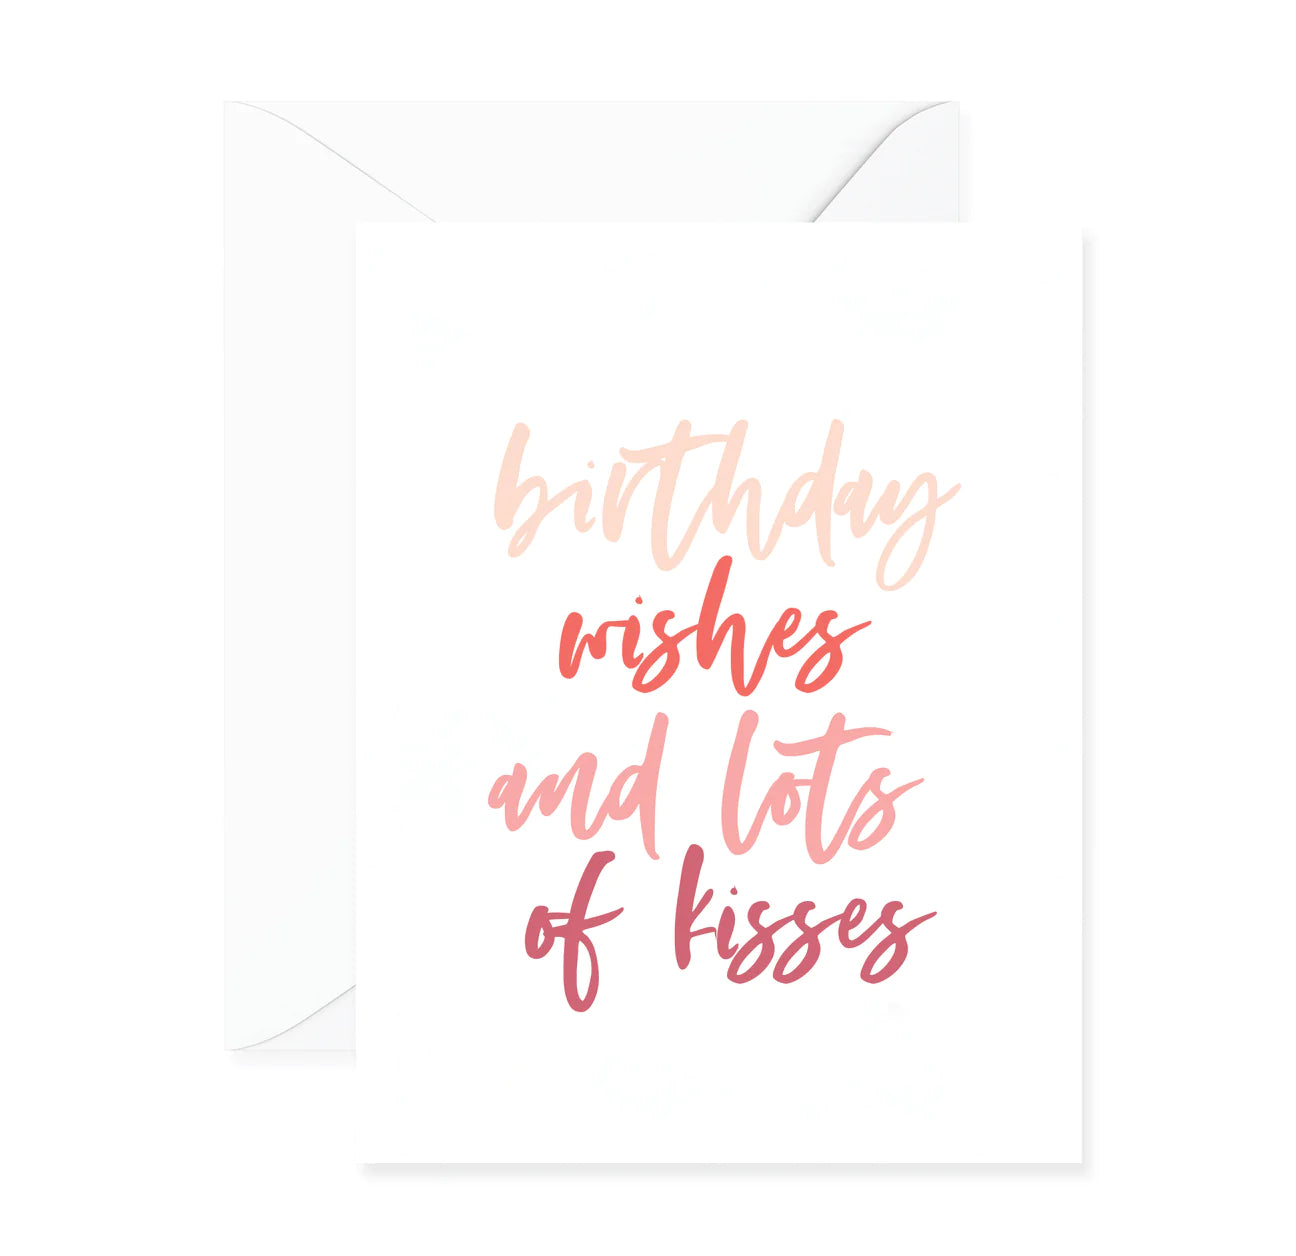 Birthday wishes and lots of kisses card